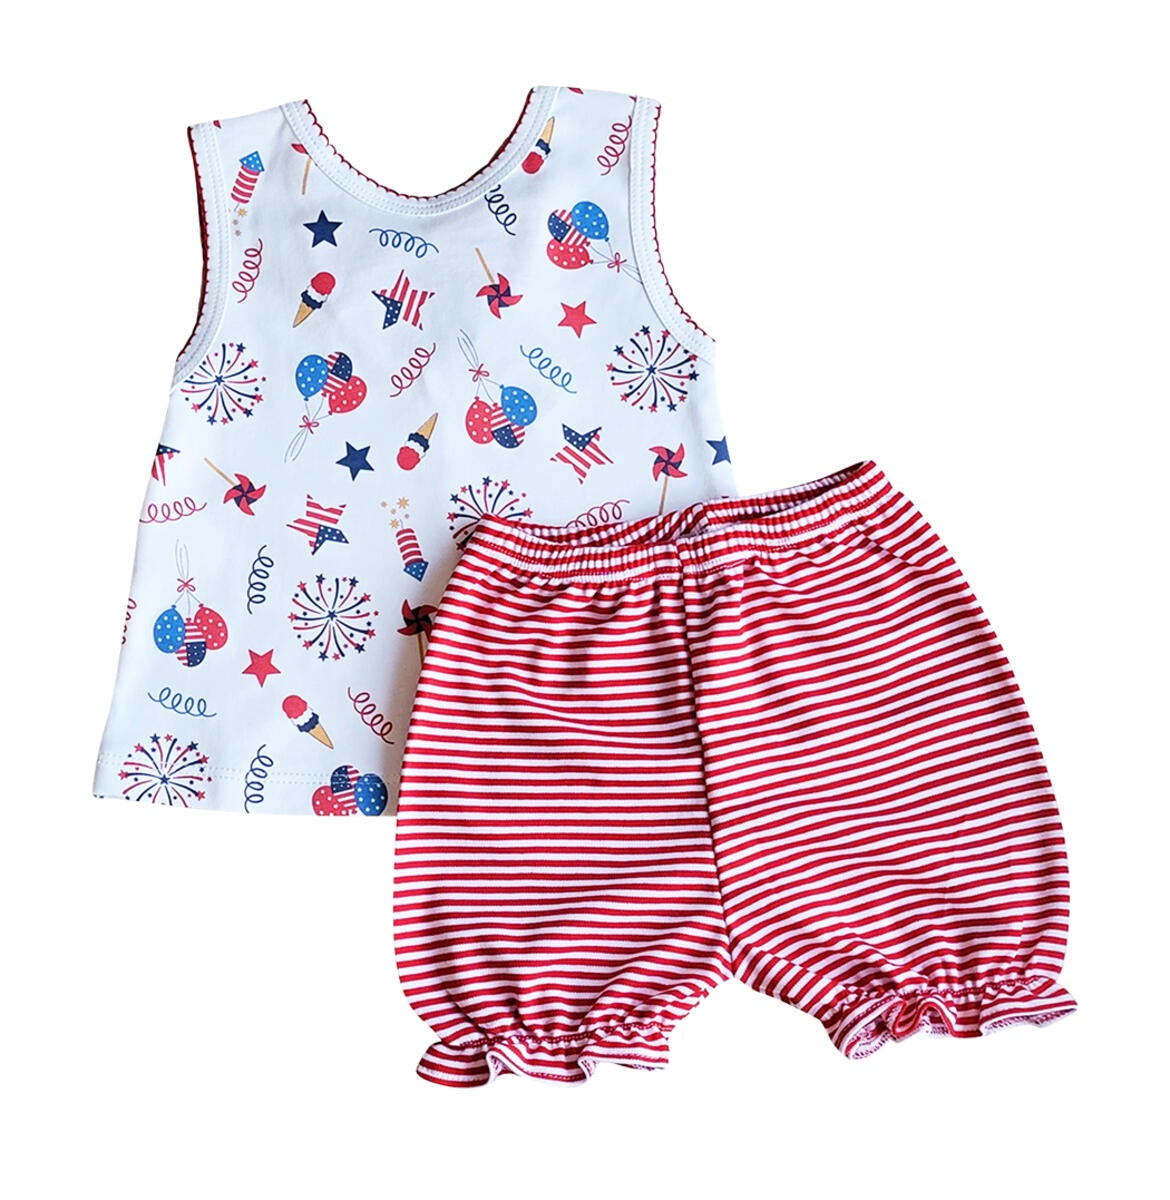 Marco & Lizzy 4th of July Print Baby Girl Diaper set Pima Cotton IF0013S2 51040